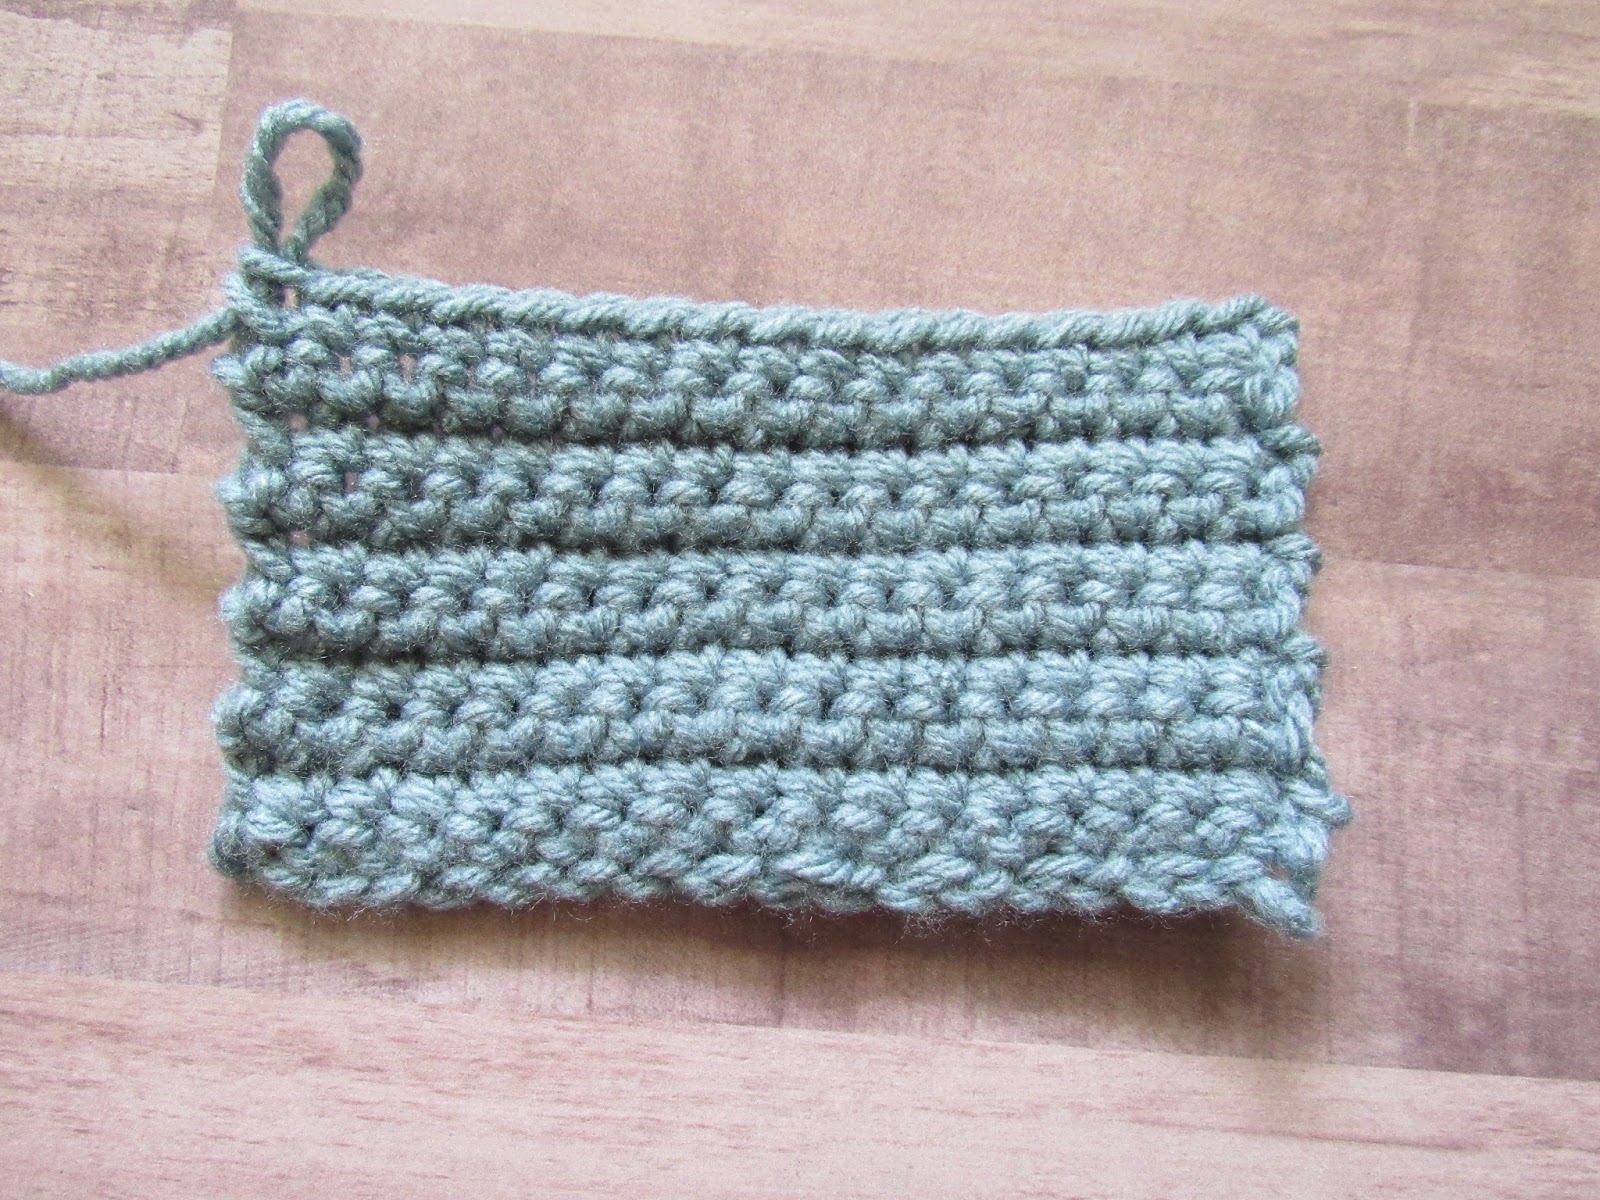 3 Easy Ways To Keep Track Of Row Count While Crocheting